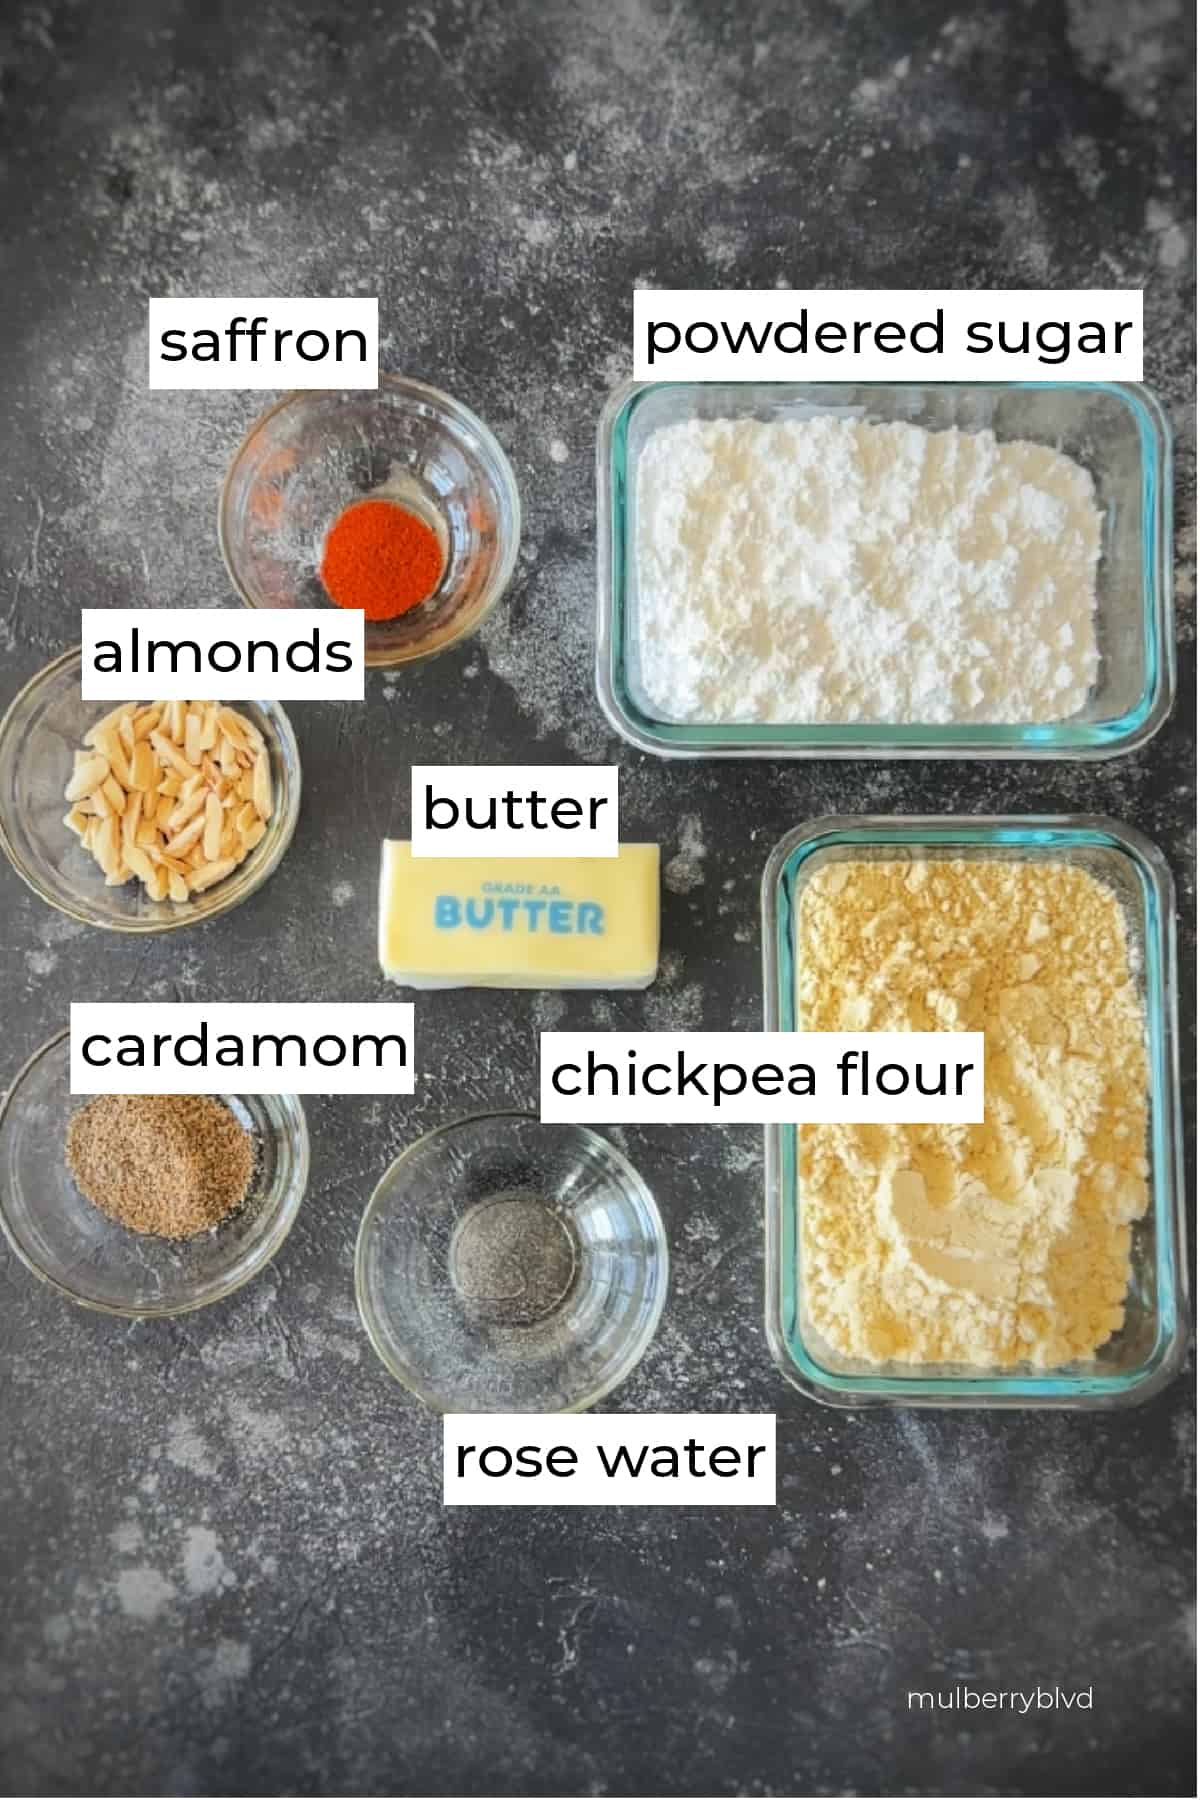 image of the ingredients used to make gluten free chickpea cookies, including rose water, cardamom, chickpea flour, butter, almonds, saffron, and powdered sugar